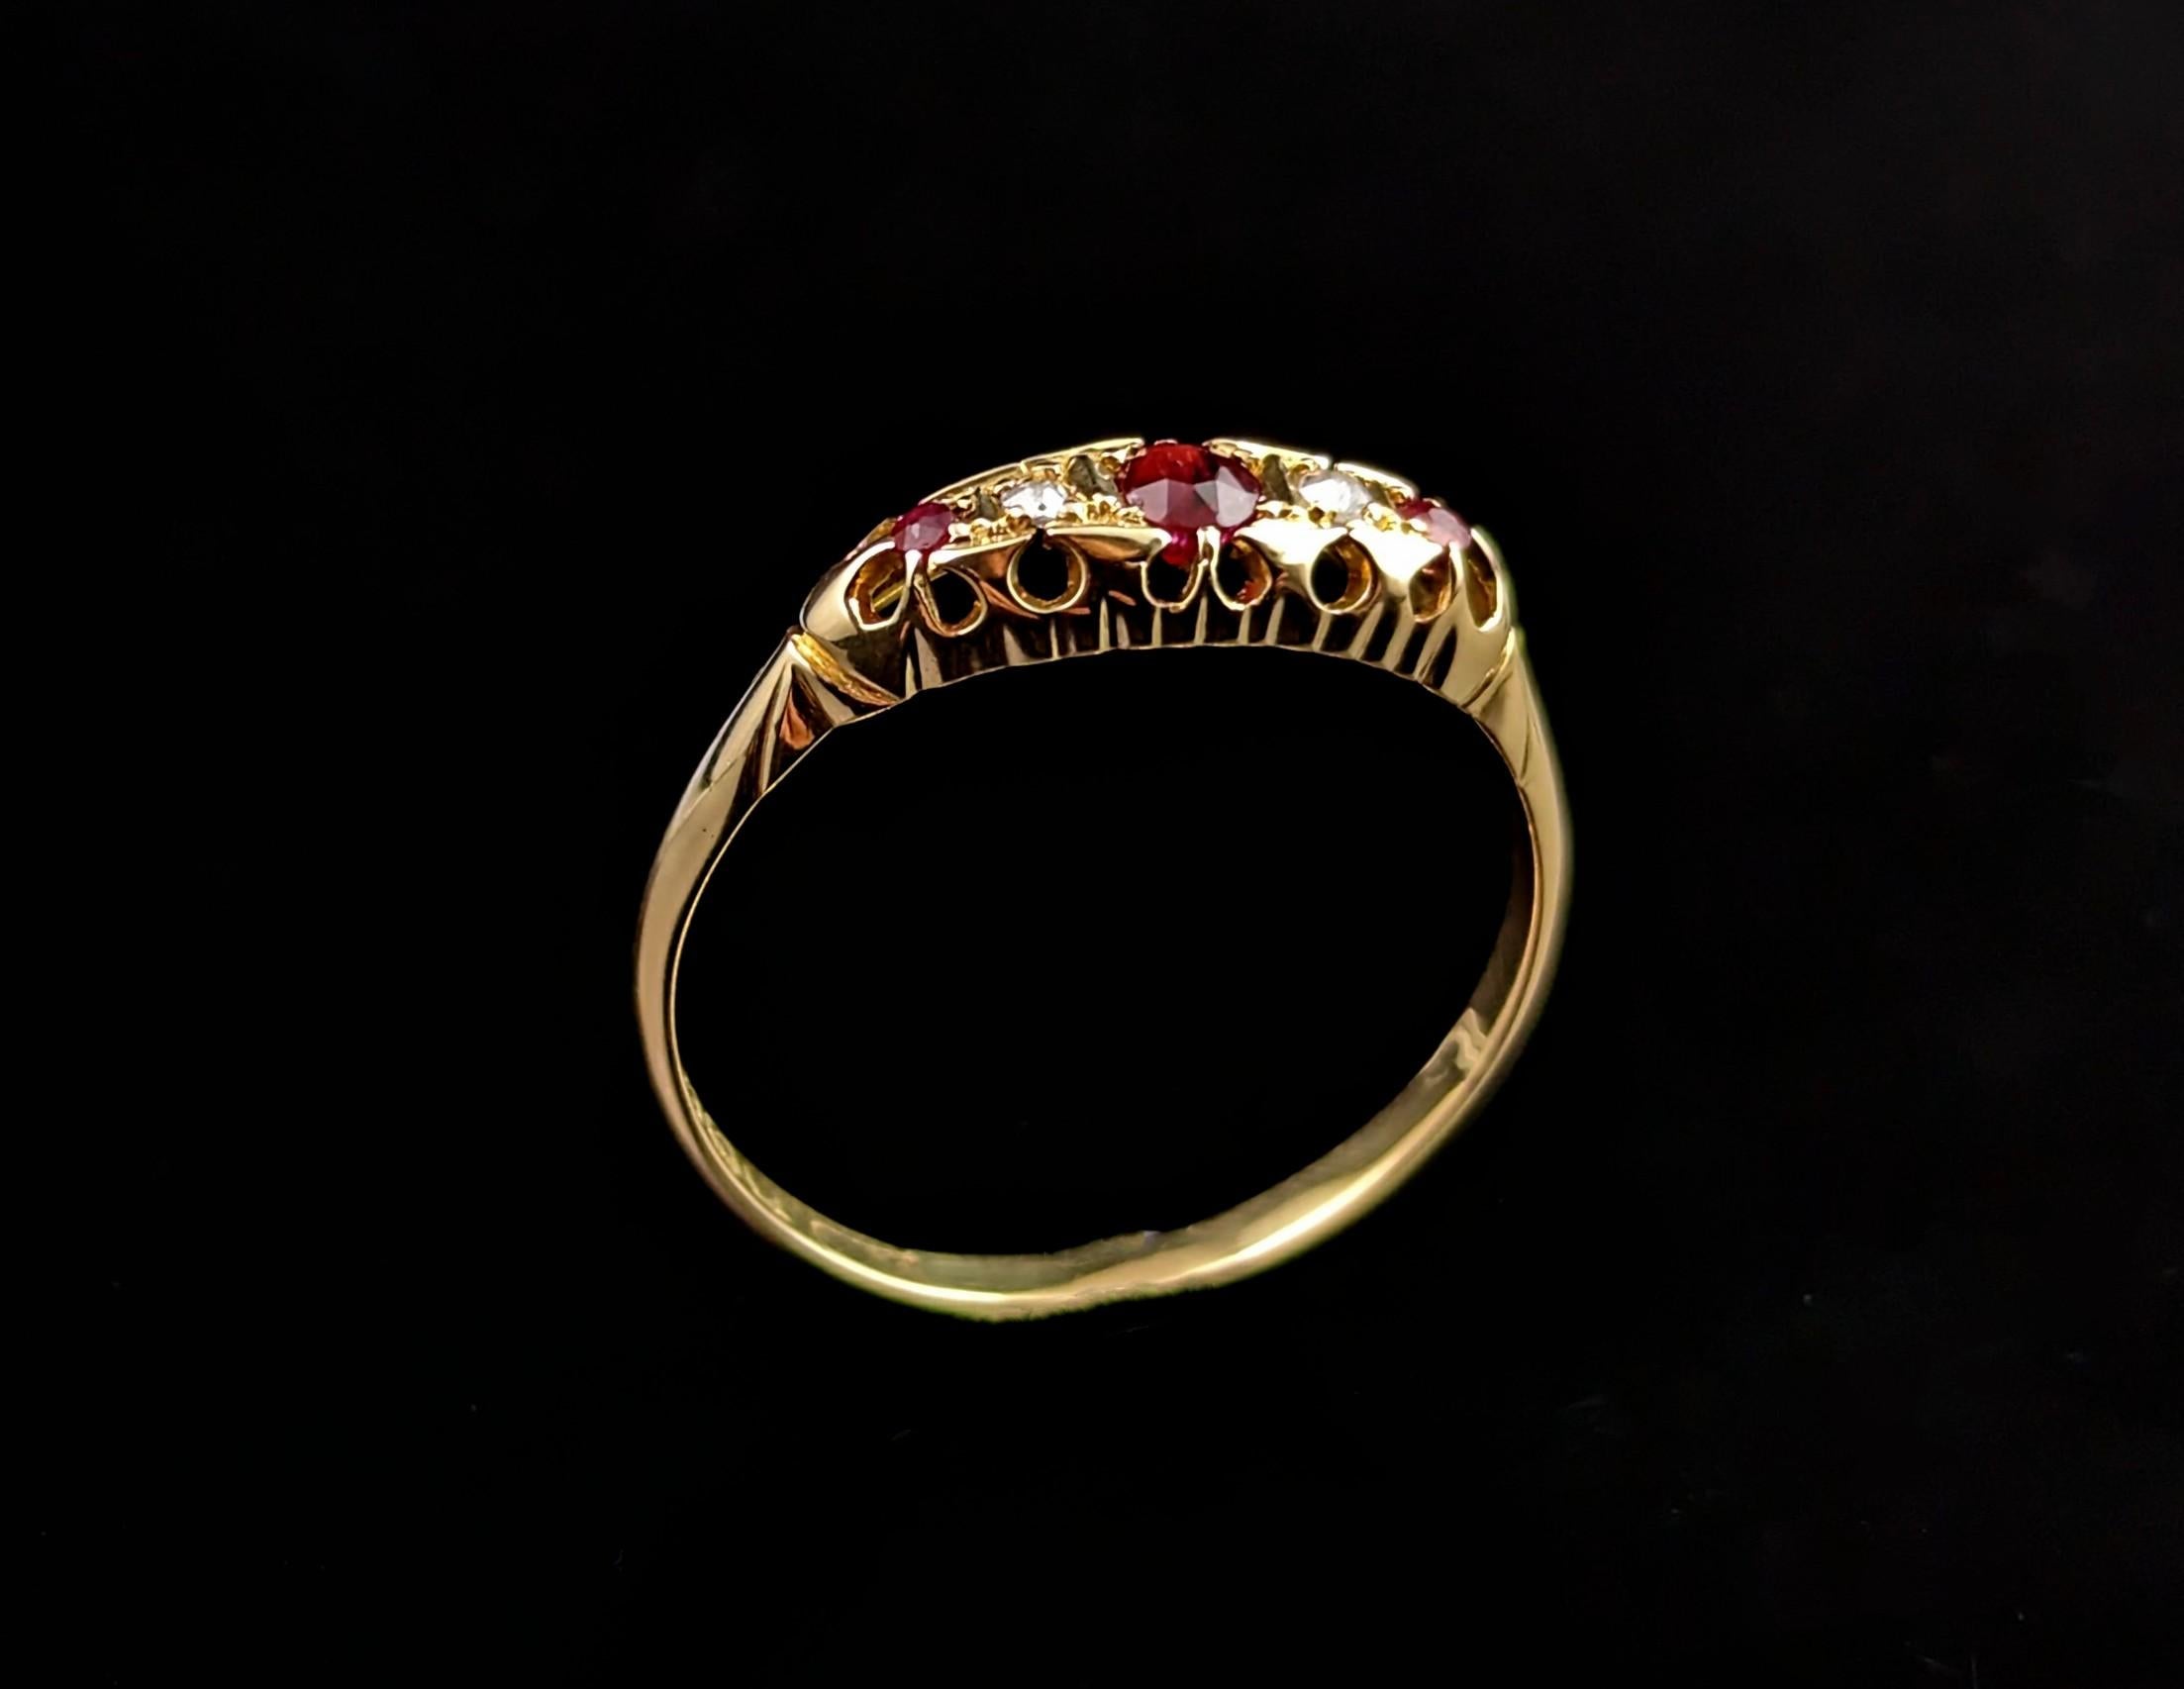 Antique Victorian Ruby and Diamond Ring, 18 Karat Yellow Gold 8